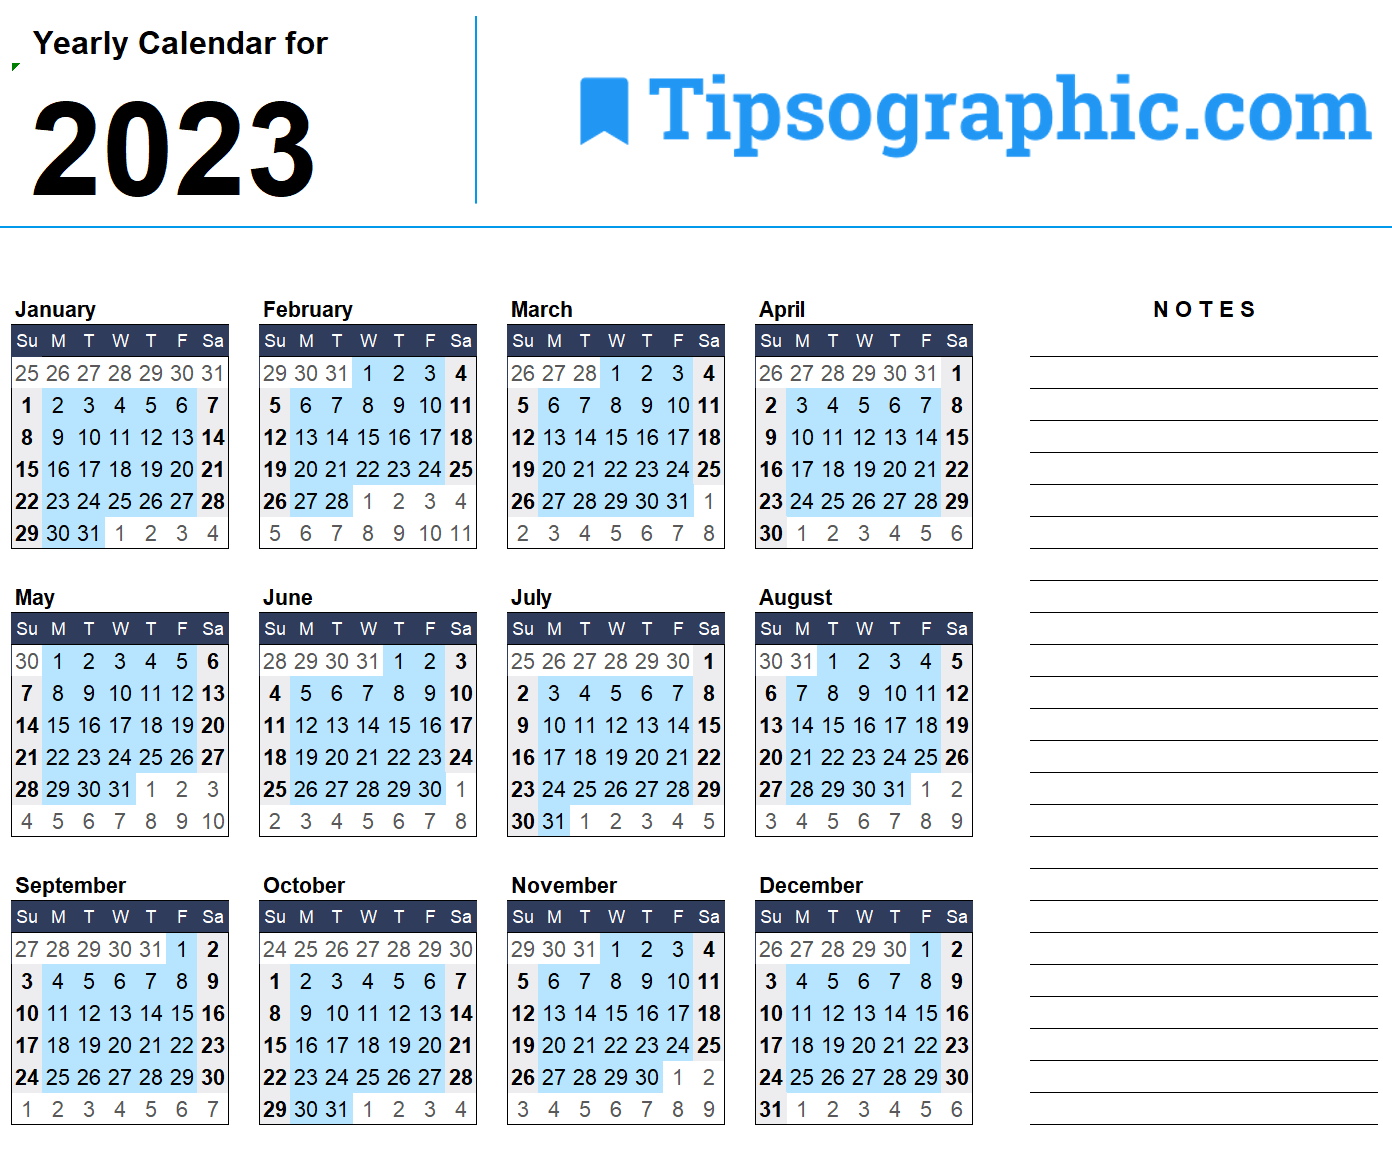 2023 Yearly Calendar Excel Tipsographic